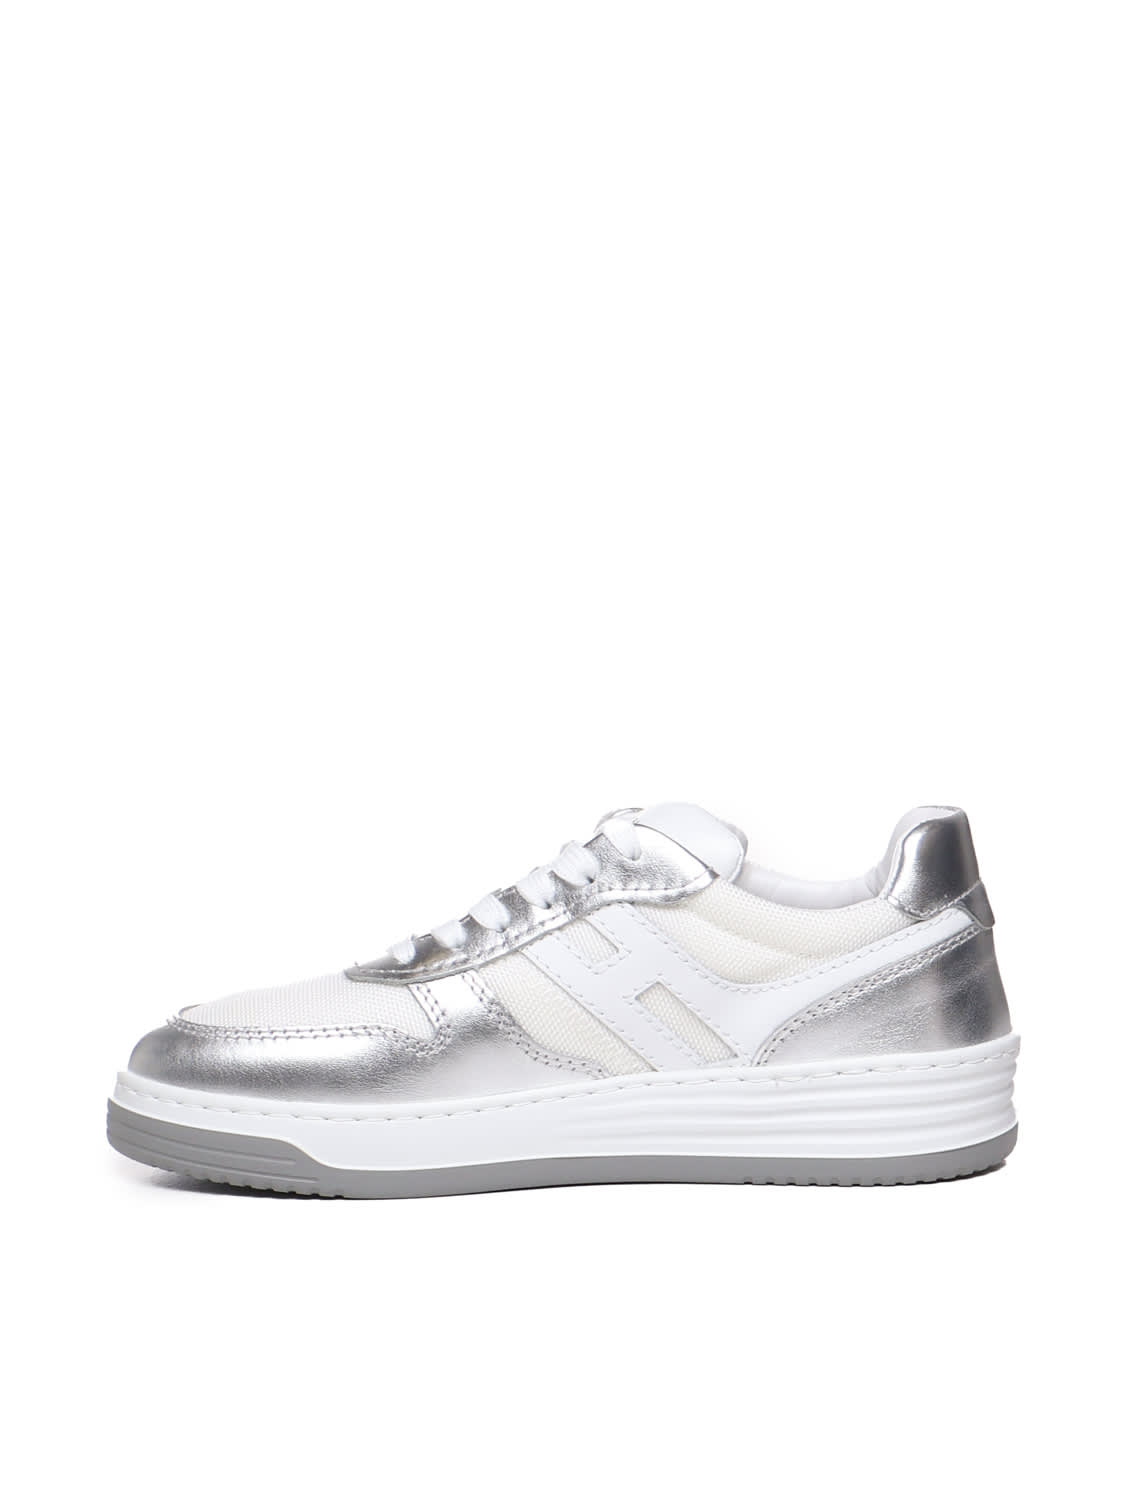 Shop Hogan 630 Sneakers With Metallic Inserts In White, Silver